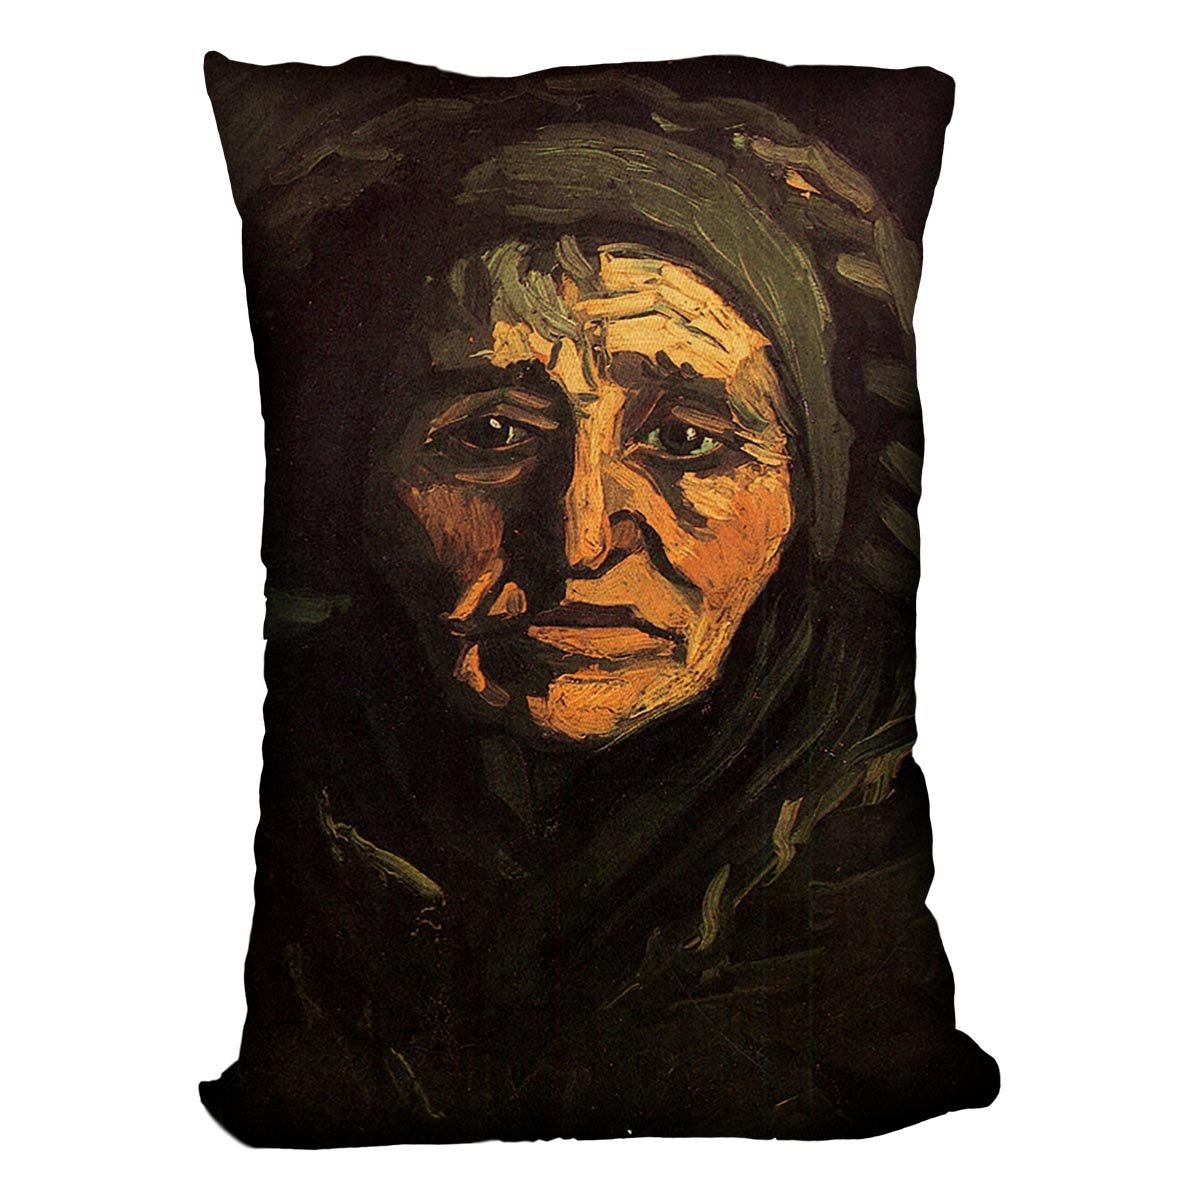 Head of a Peasant Woman with Greenish Lace Cap by Van Gogh Throw Pillow